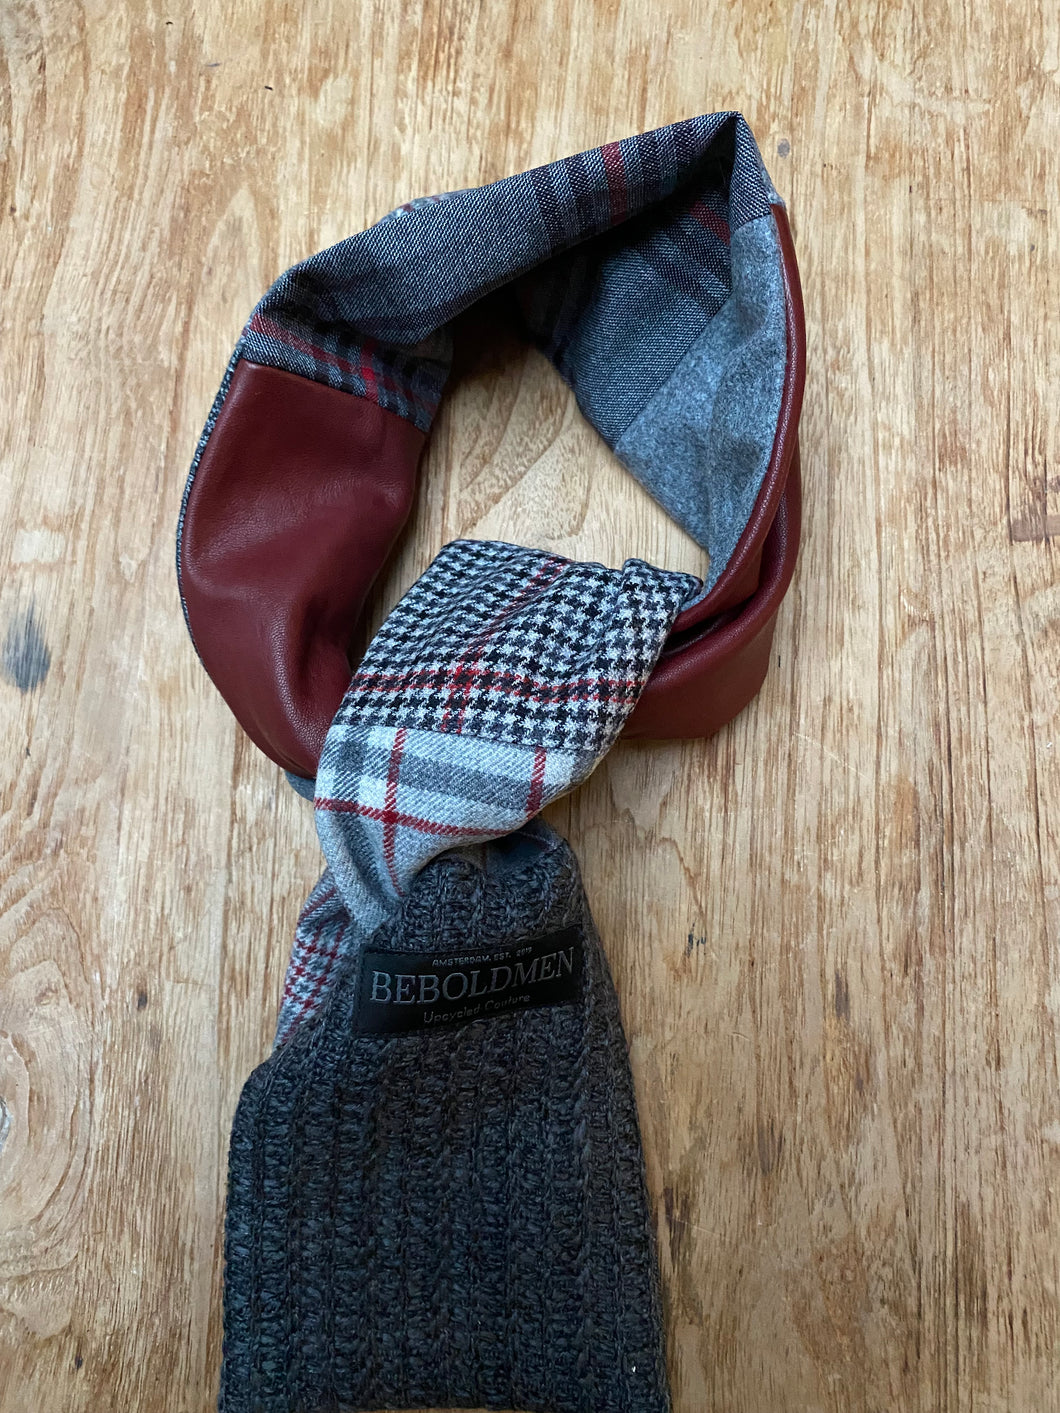 Woolen scarf In light gray with off white and dark red